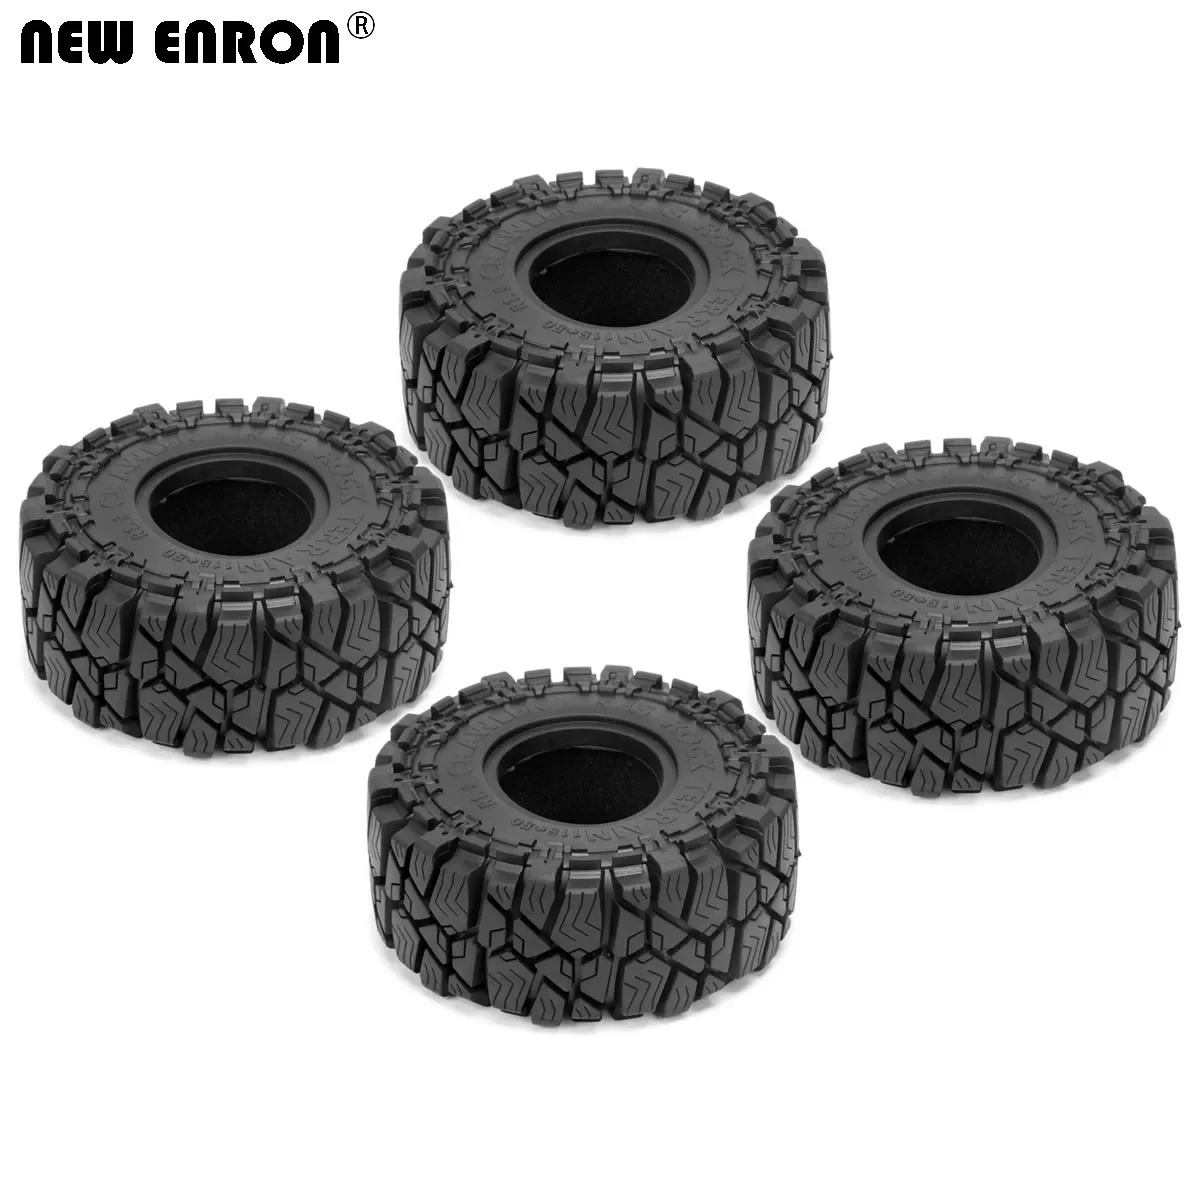 

1.9 inch Rubber Wheel Tires Tyres 115*50MM for RC 12mm 1/10 Hex Crawler AXIAL SCX10 90047 TRAXXAS TRX4 REDCAT